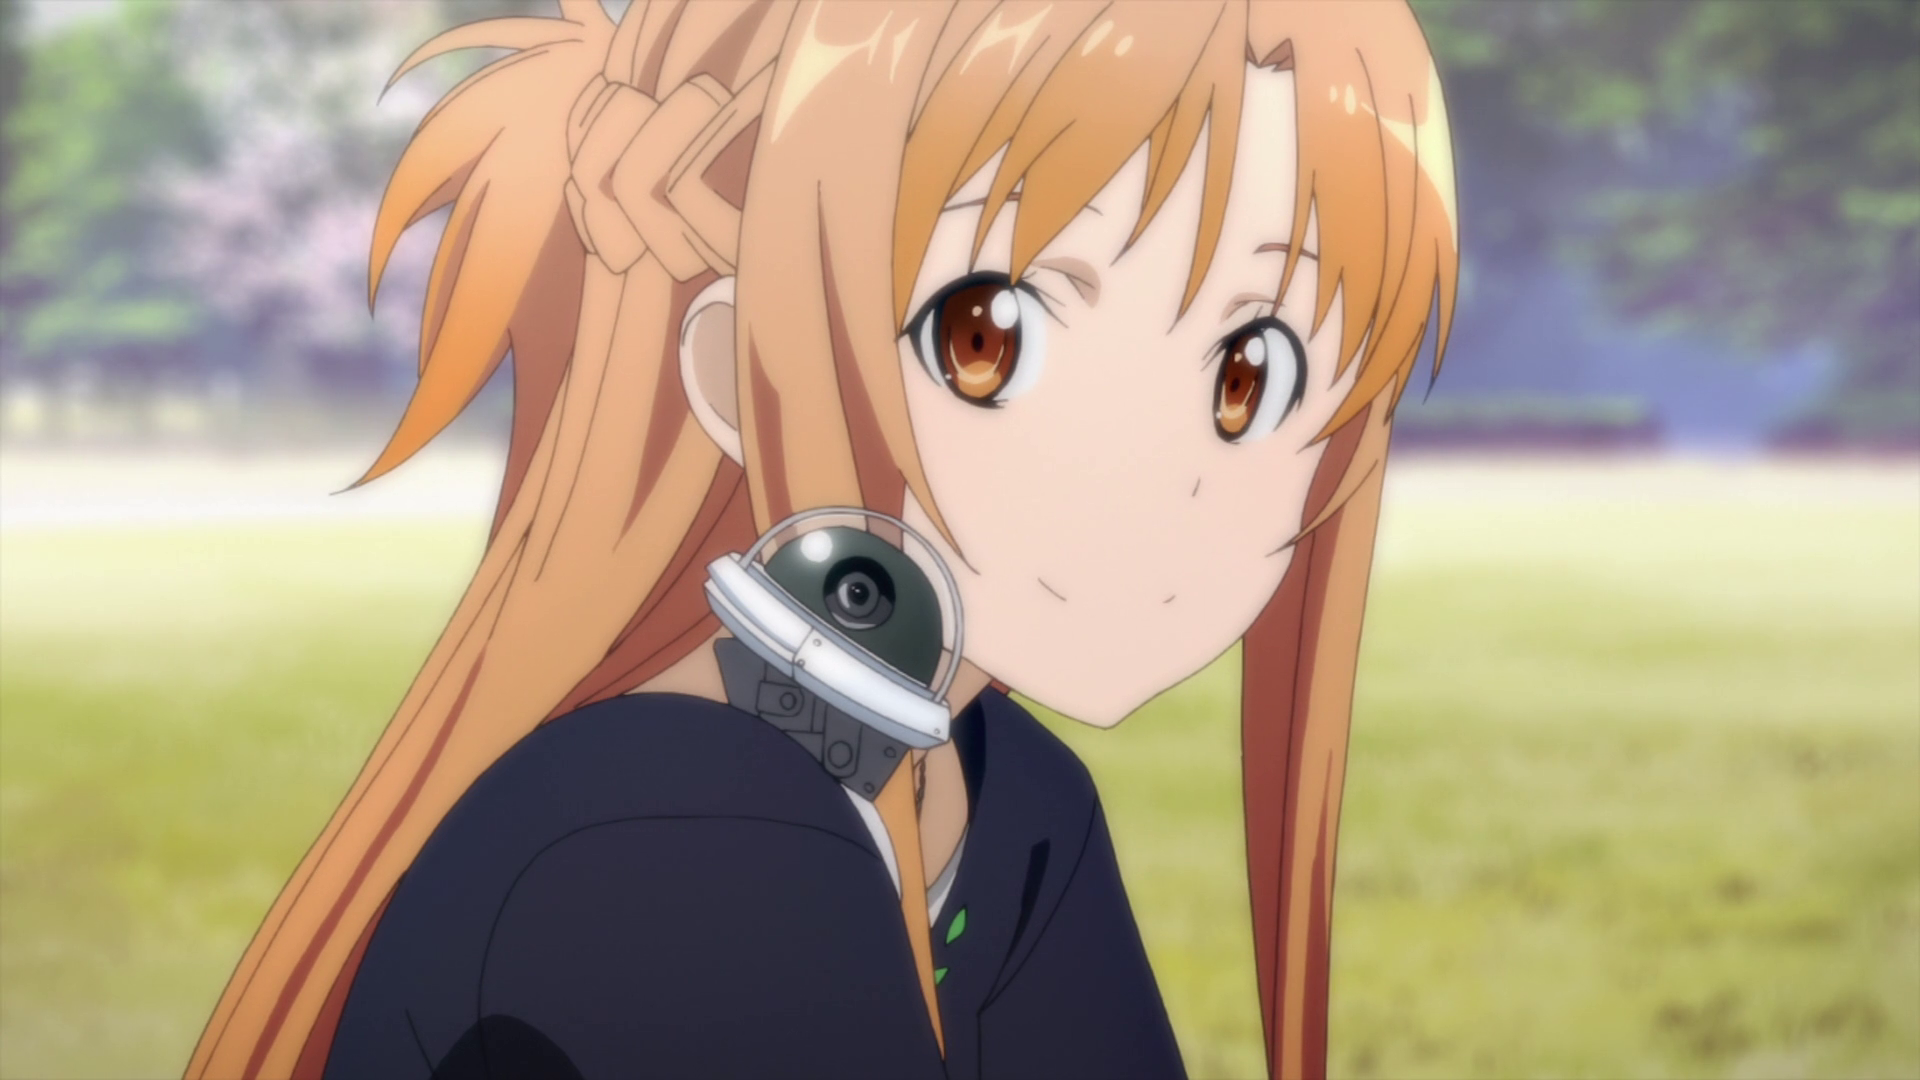 Image of Asuna from Sword Art Online anime